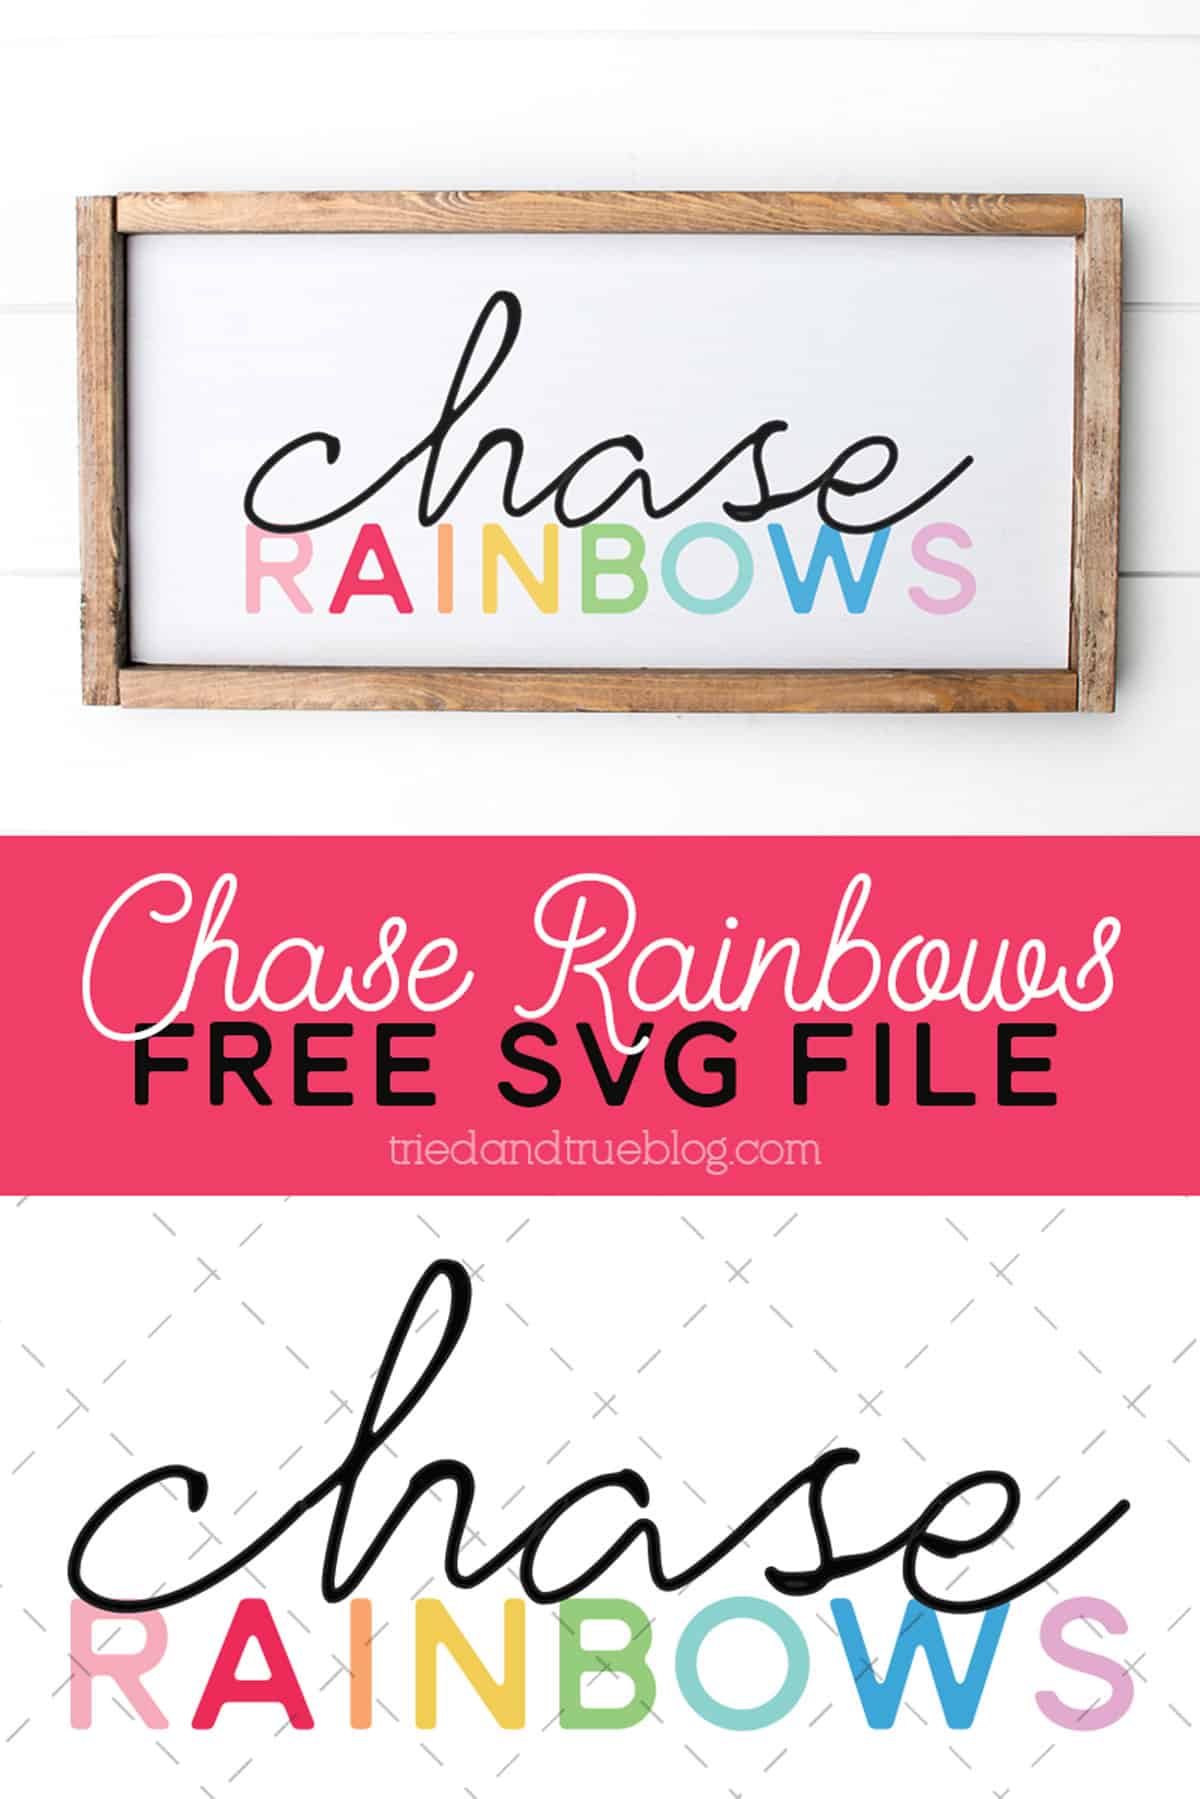 Chase Rainbows Free SVG File